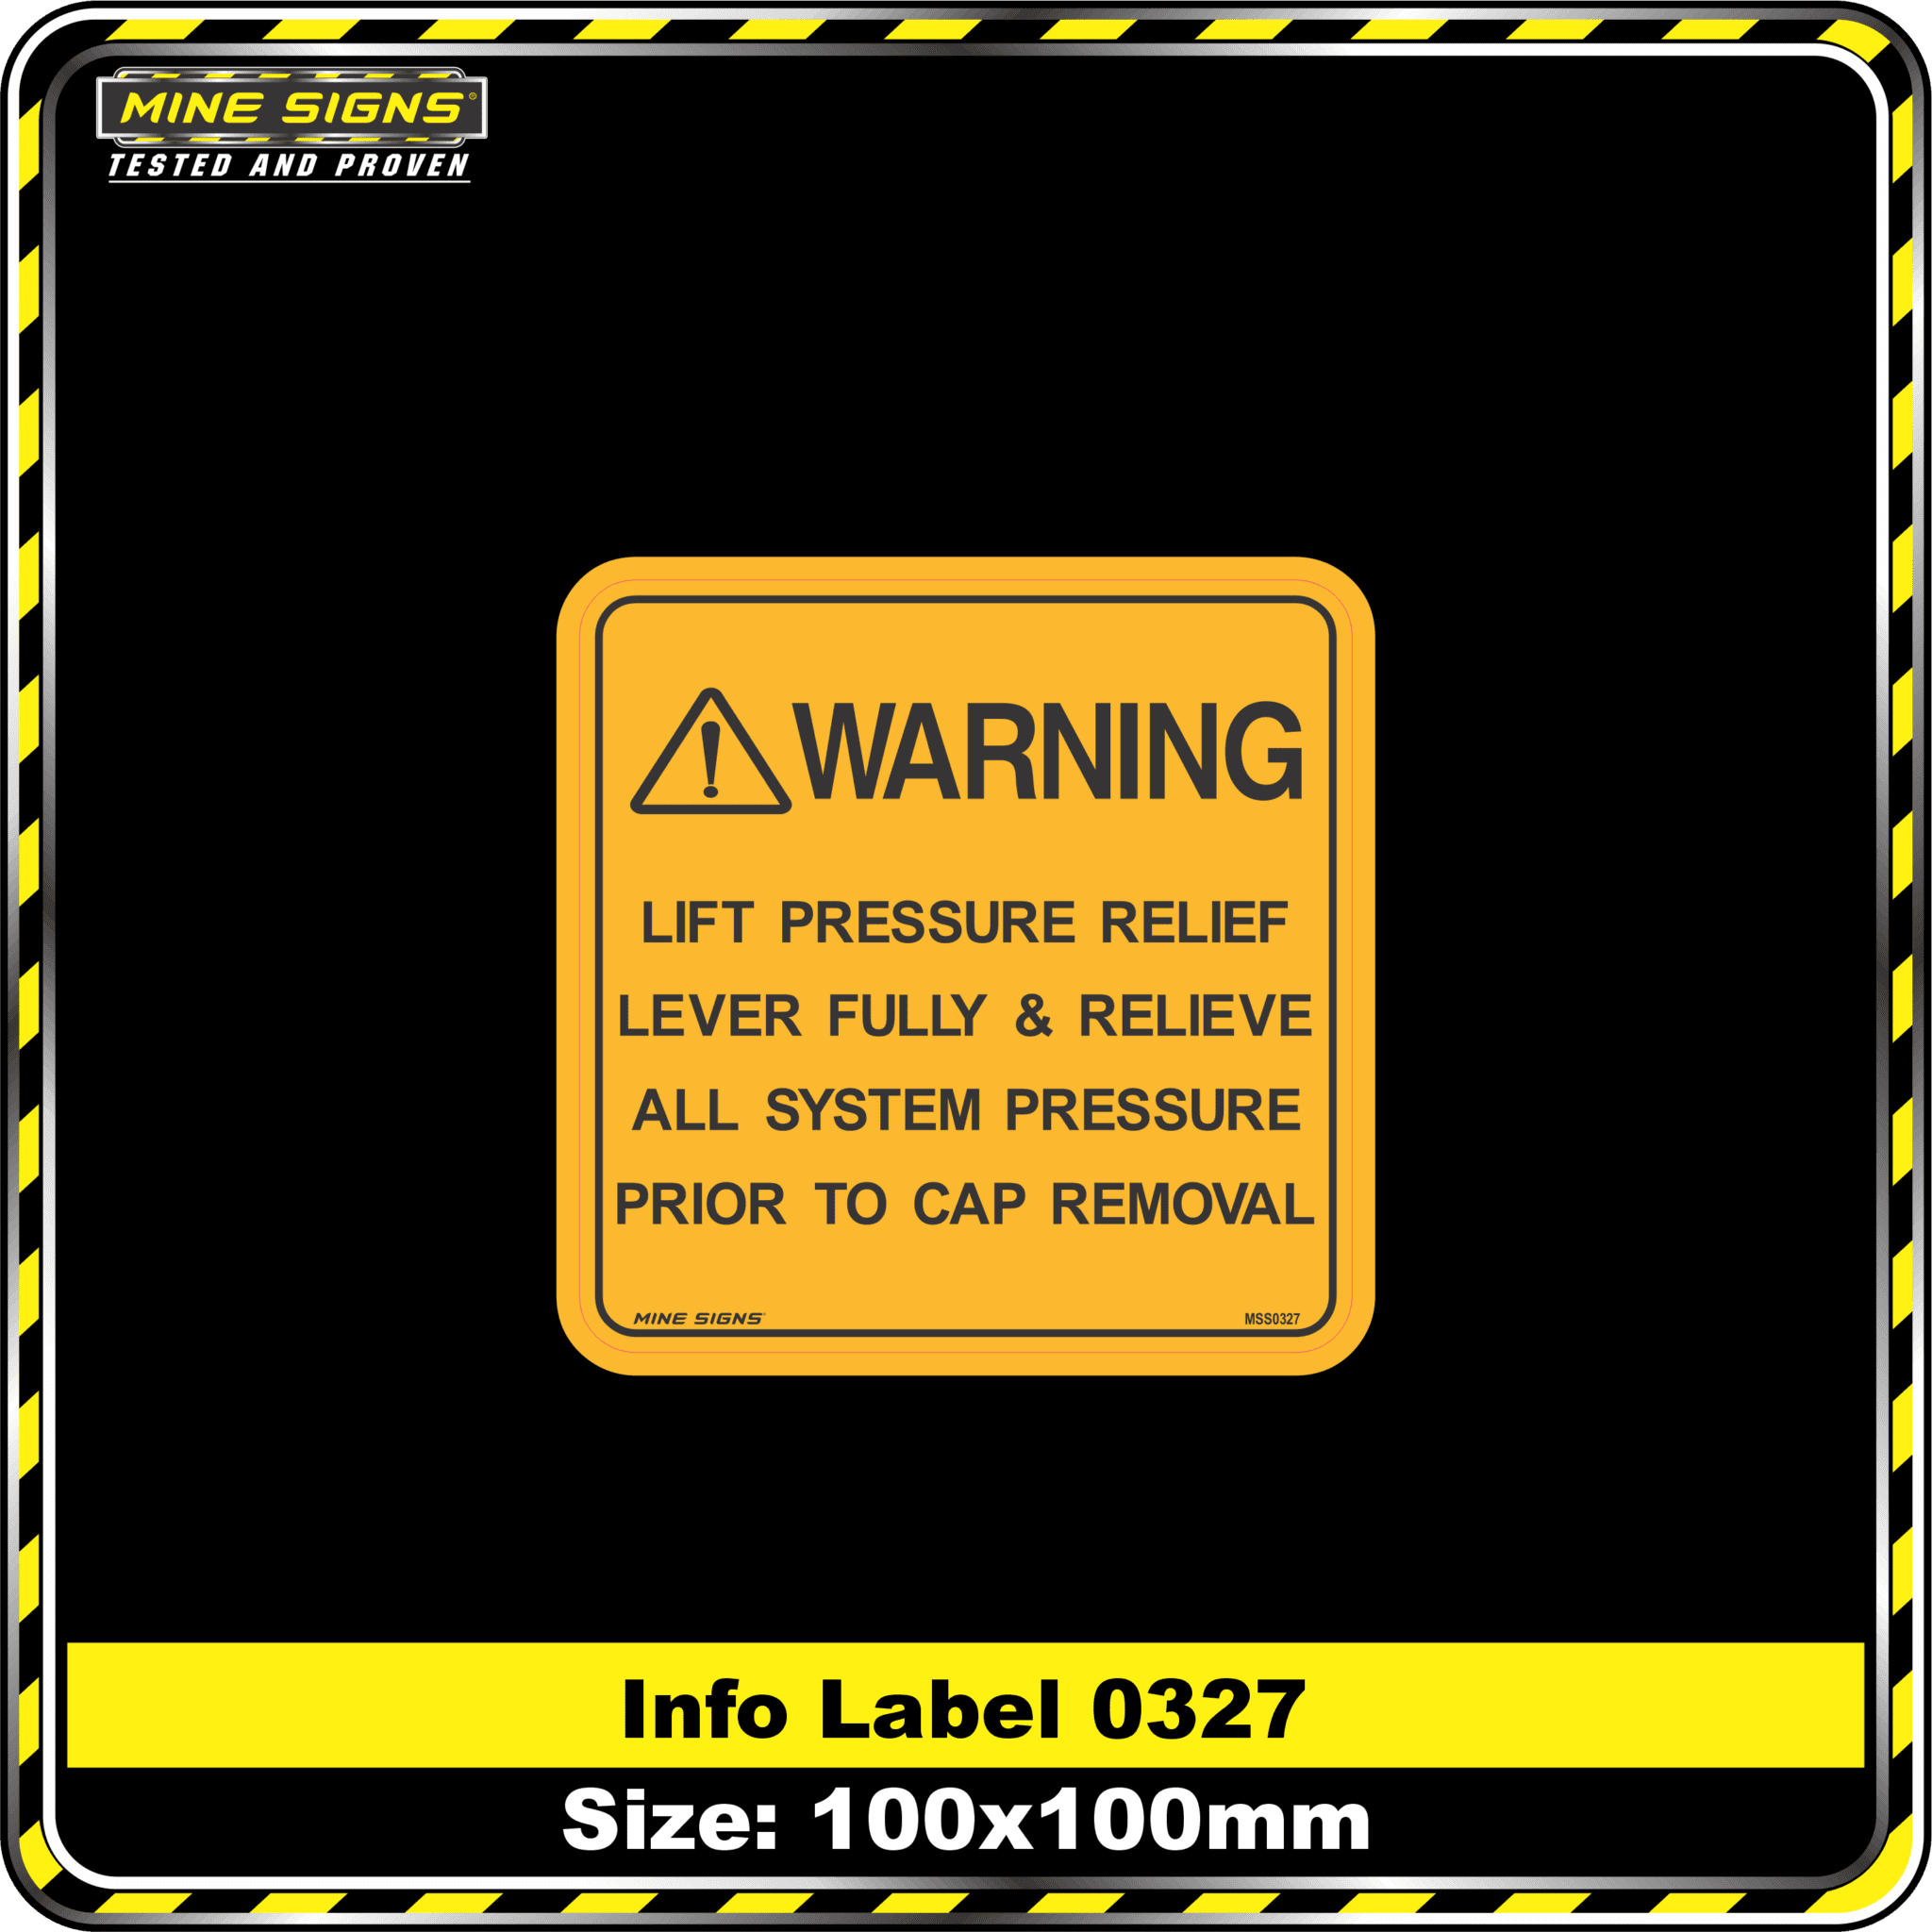 Warning Lift Pressure Relief Lever Fully & Relieve All System Pressure Prior to Cap Removal